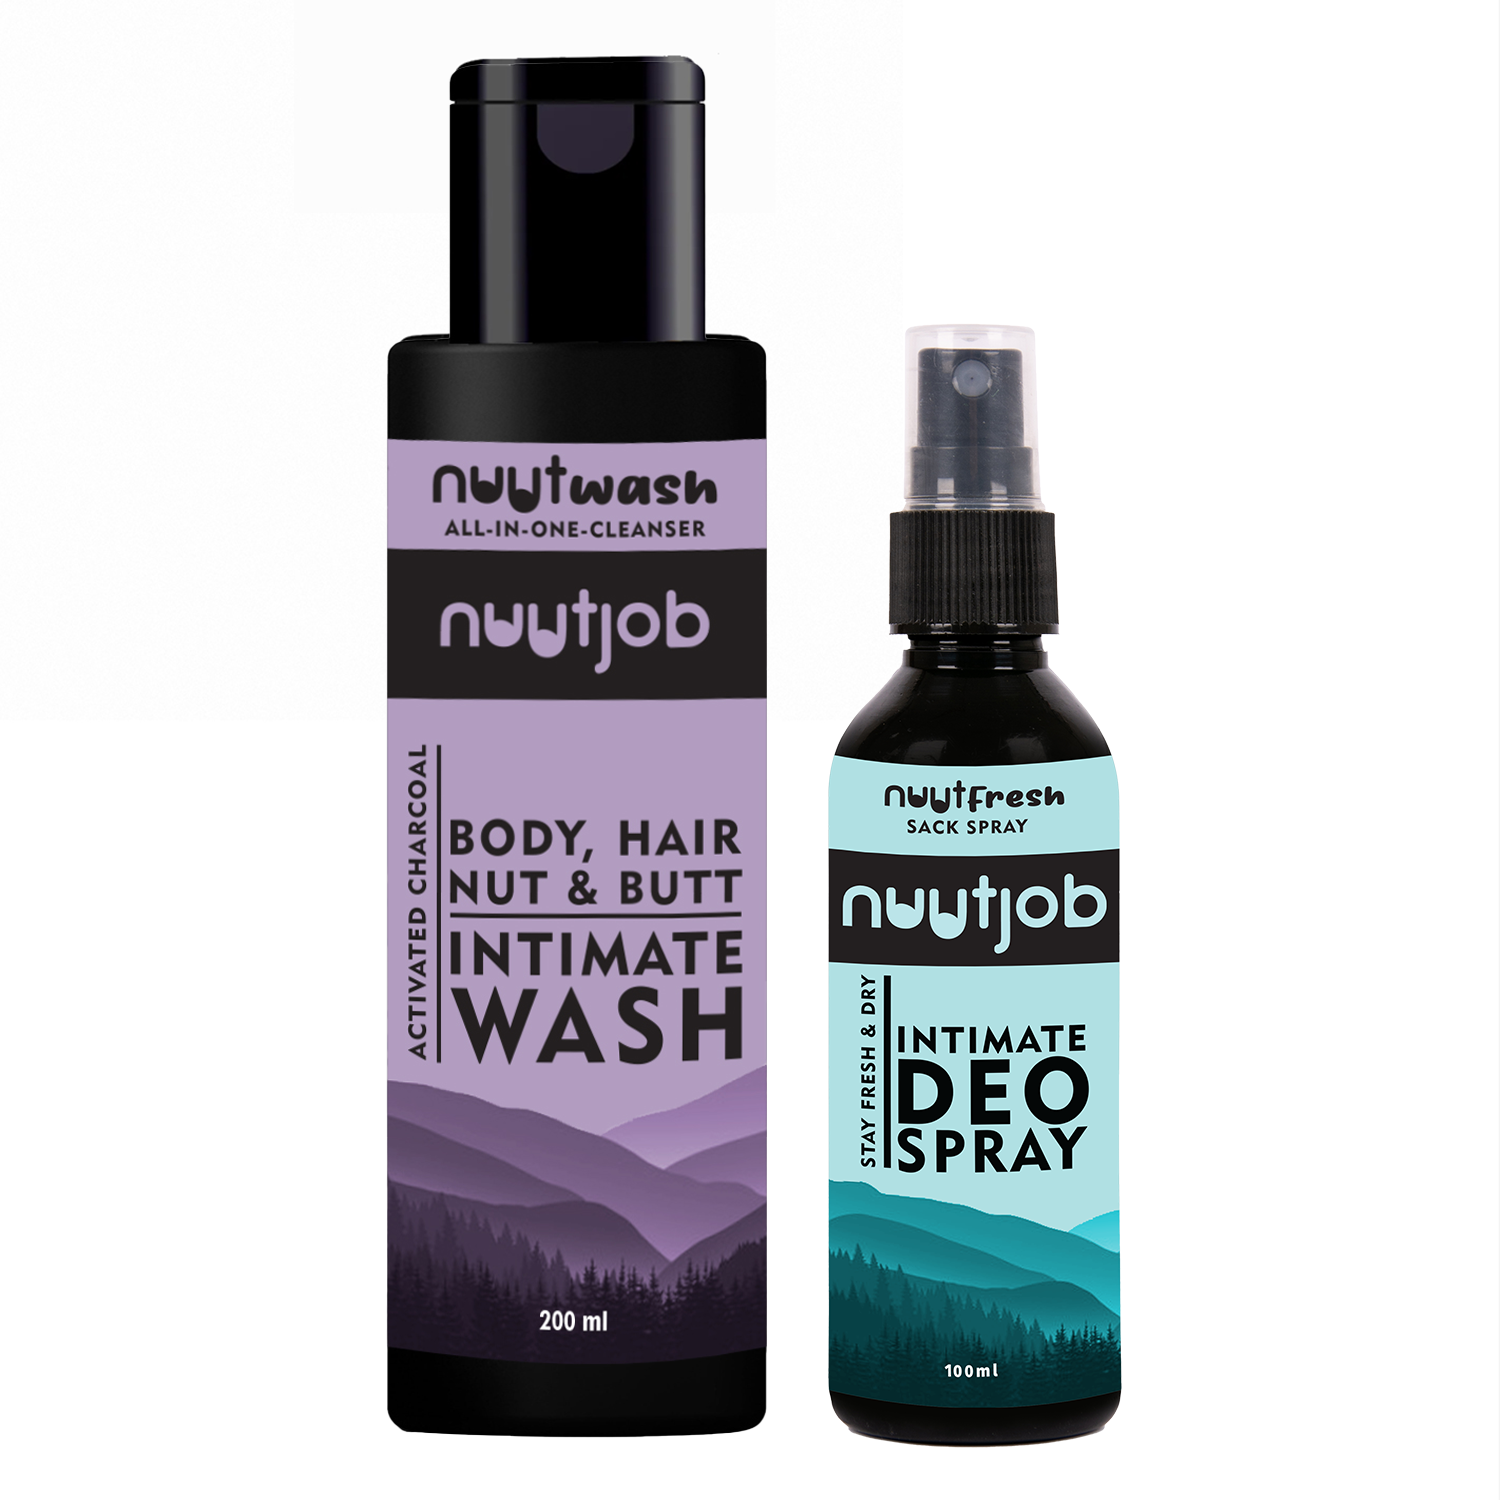 Stay Fresh 300ml Combo Intimate And Hygiene Wash + Intimate Deo